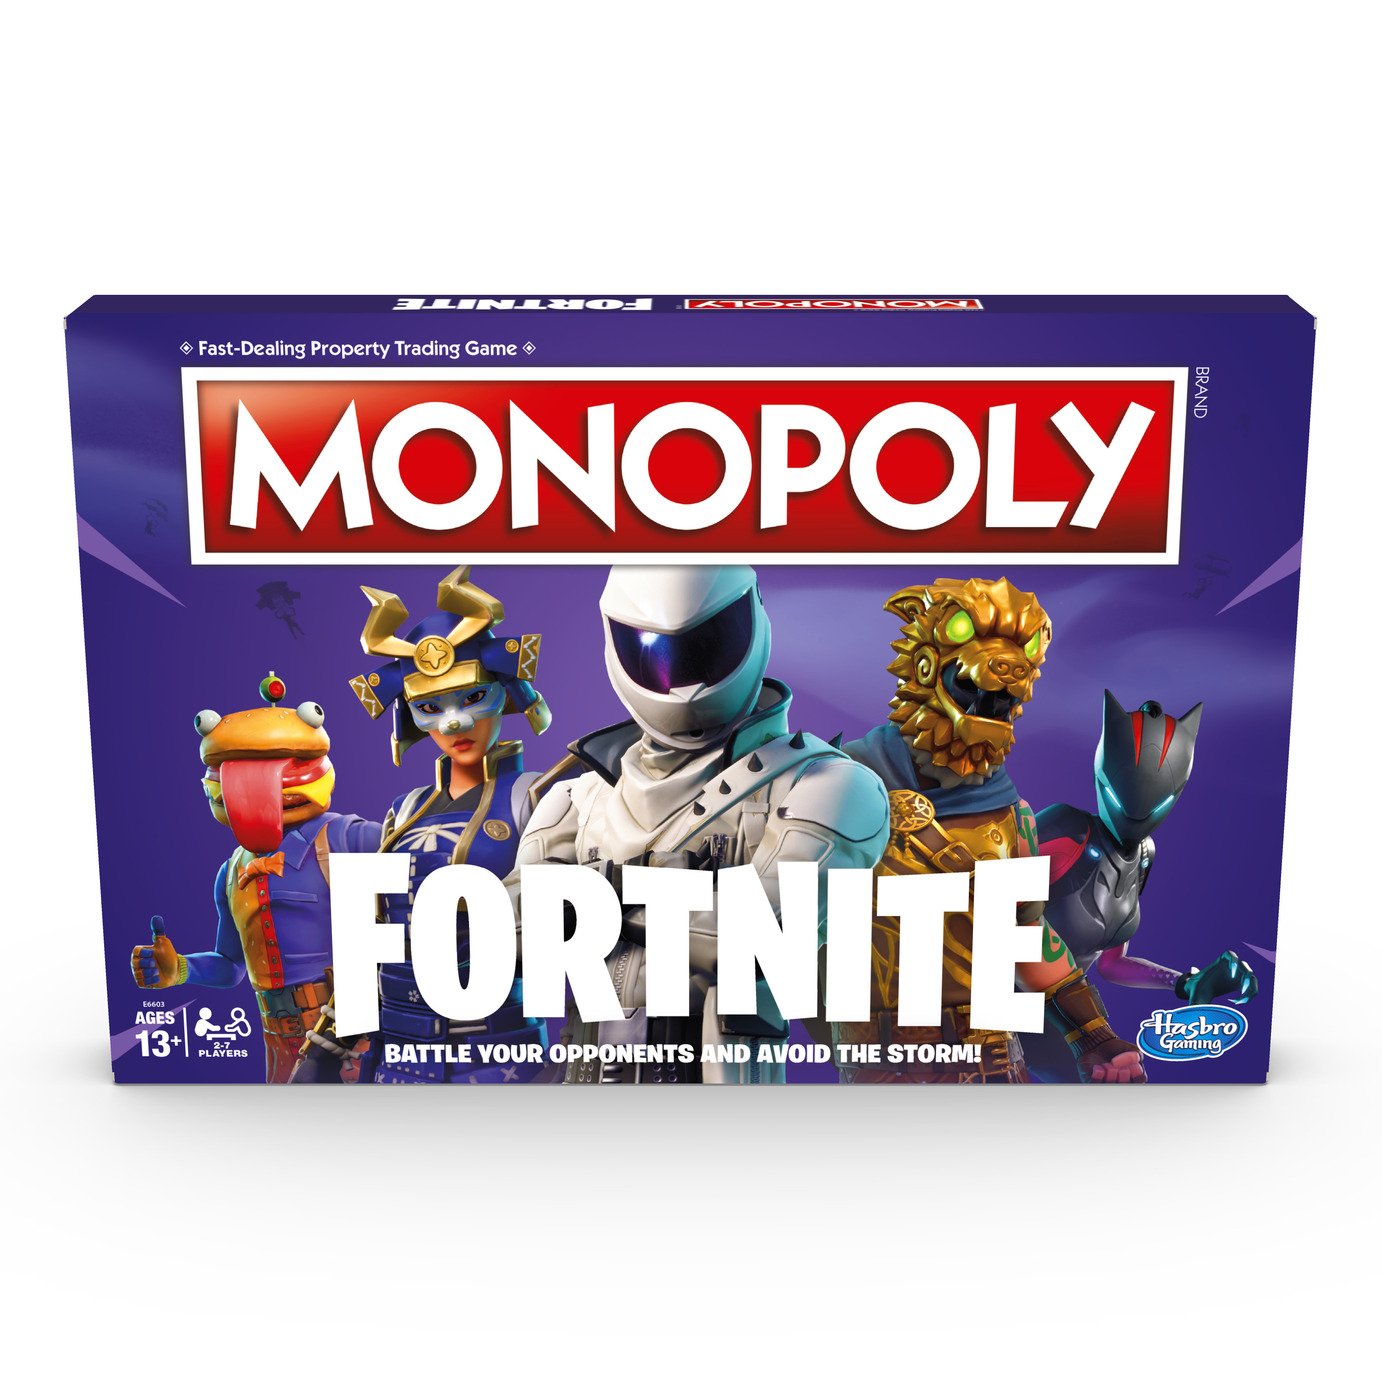 Monopoly Fortnite From Hasbro Gaming